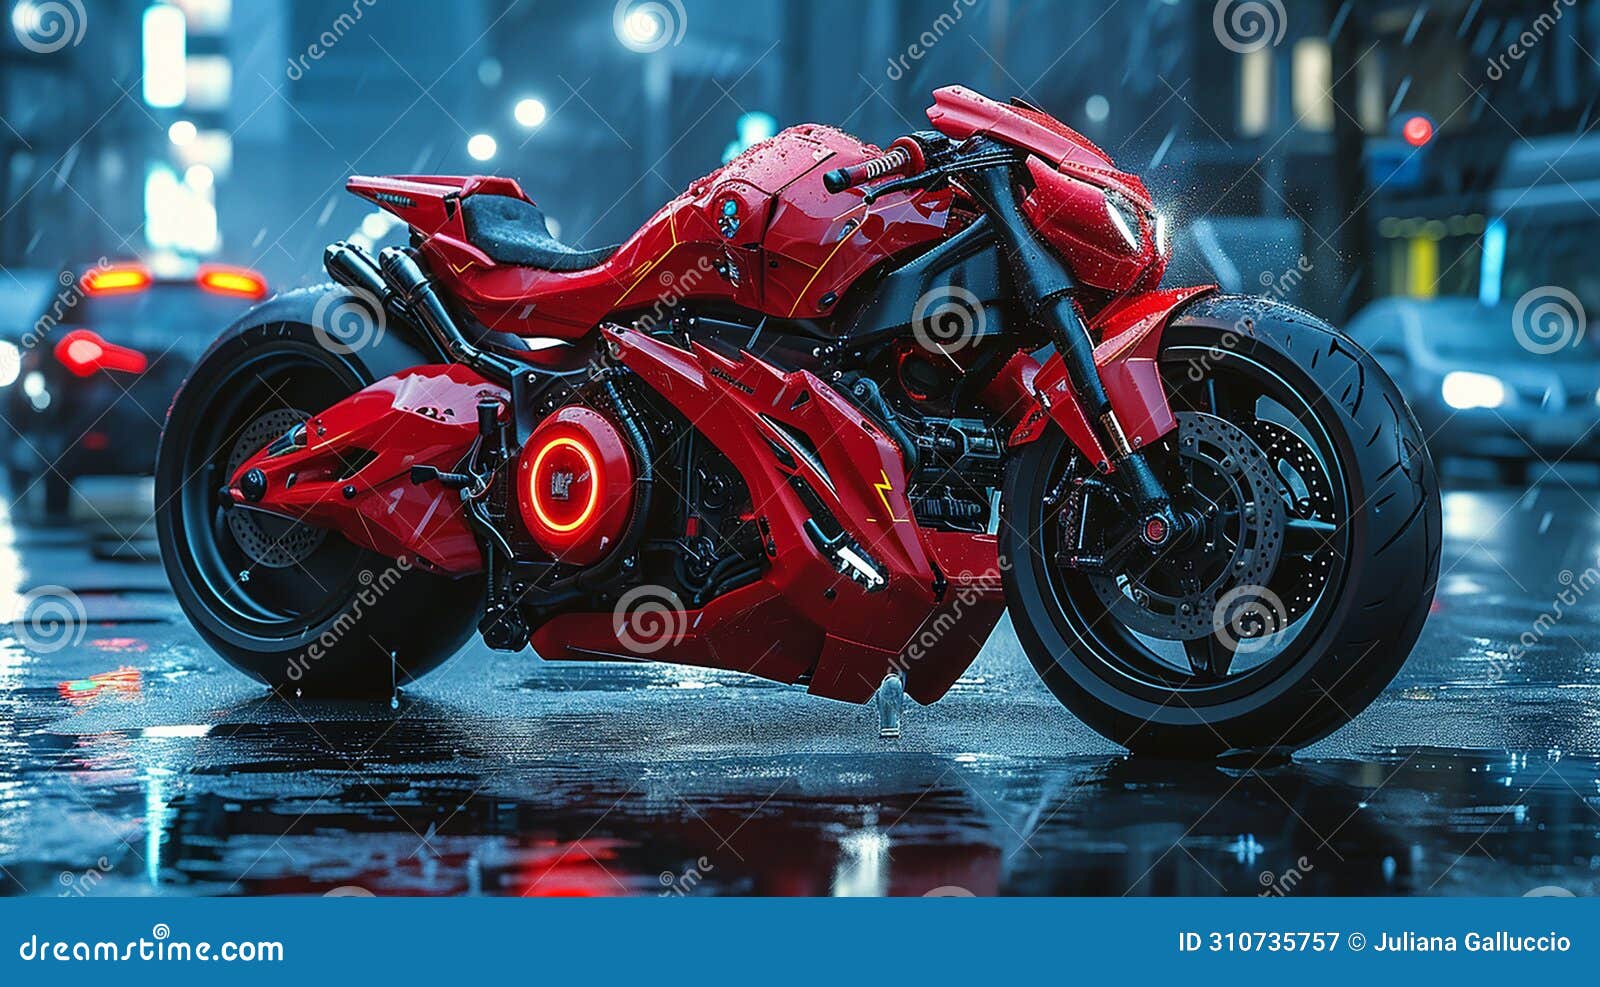 red motorcycle parked on wet surface